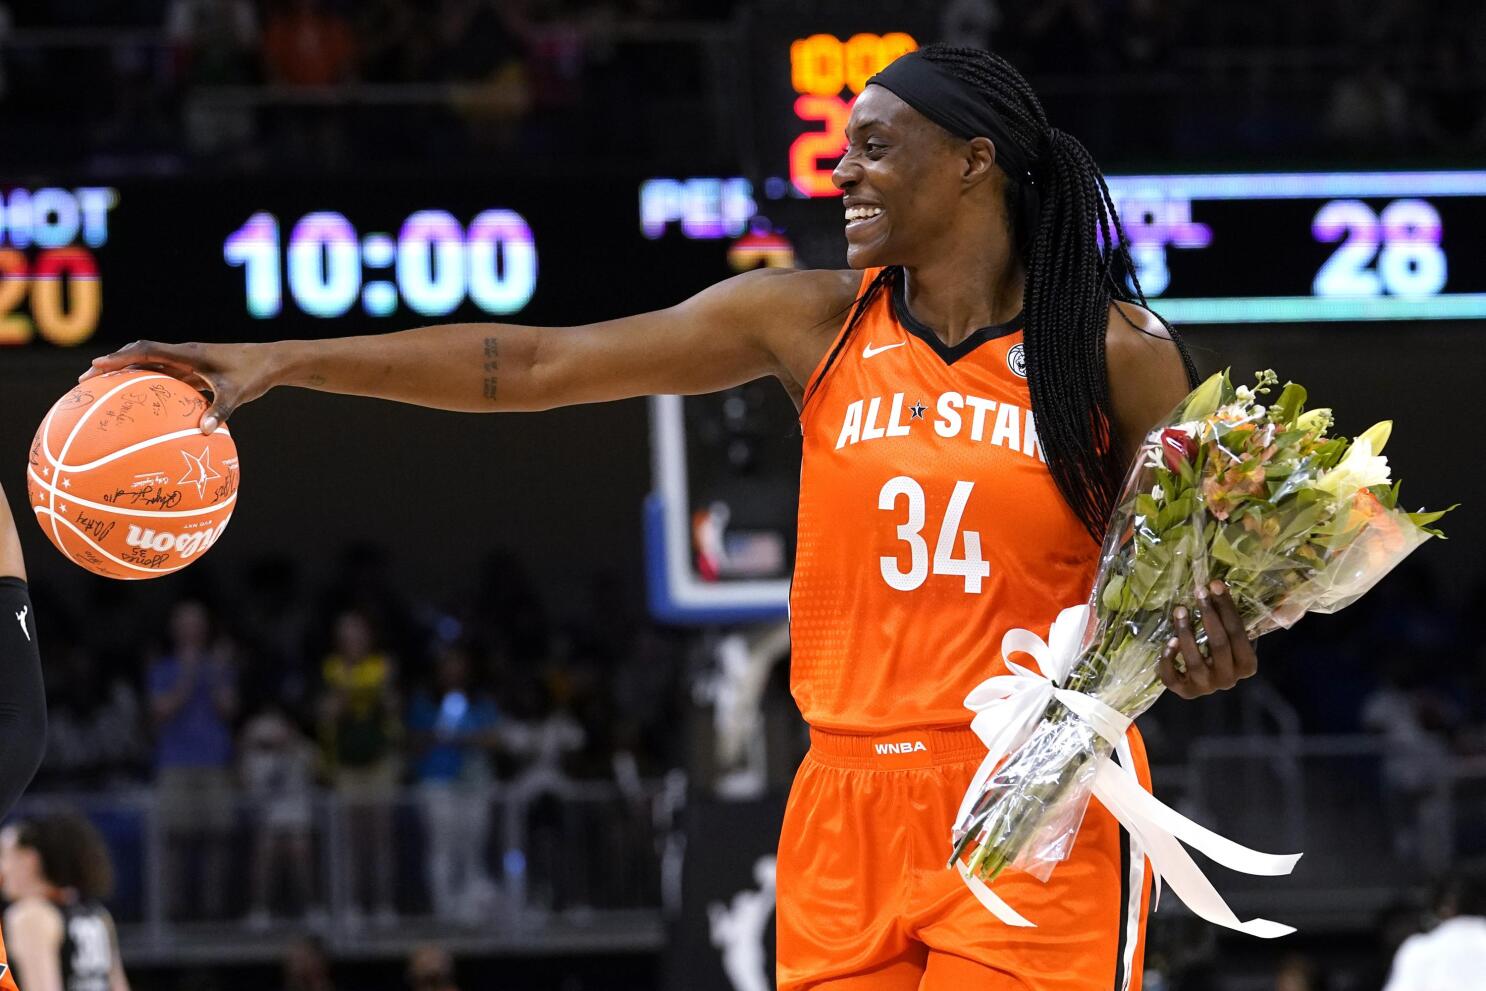 Photos: WNBA All-Star Game in Chicago